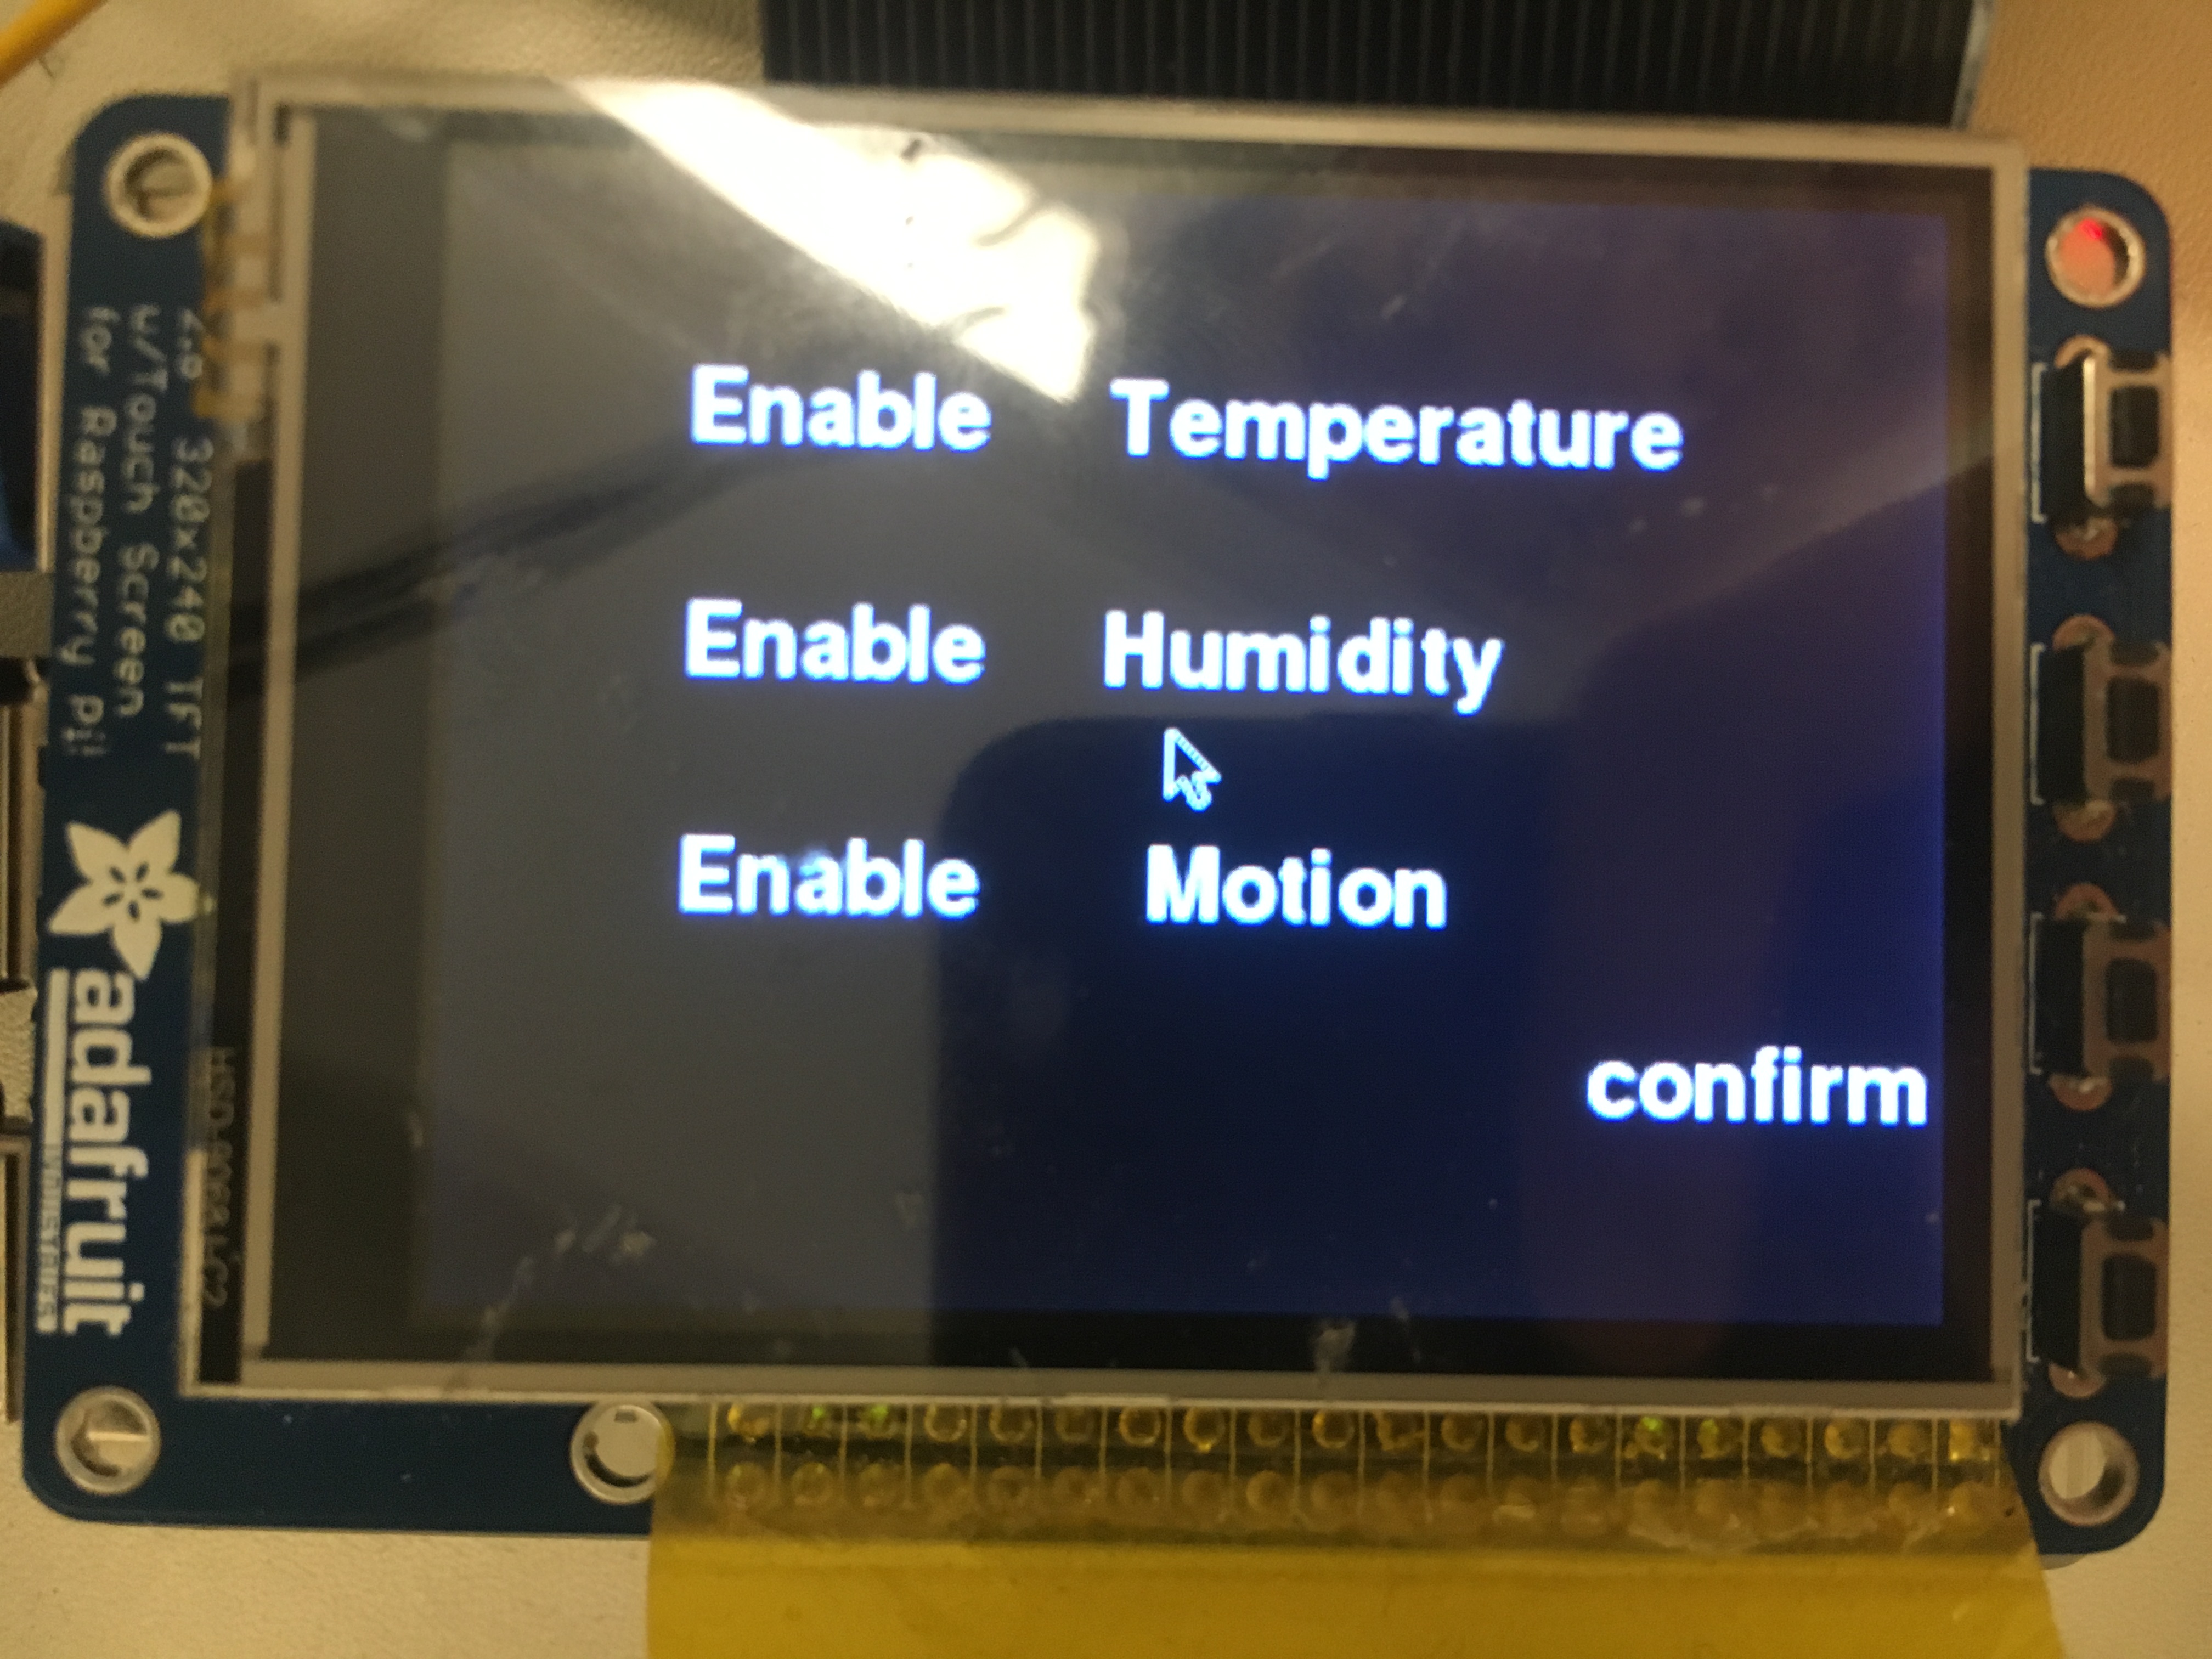 Sensor Setting Menu UI<br/>(Visible Mouse To Show Functionality)